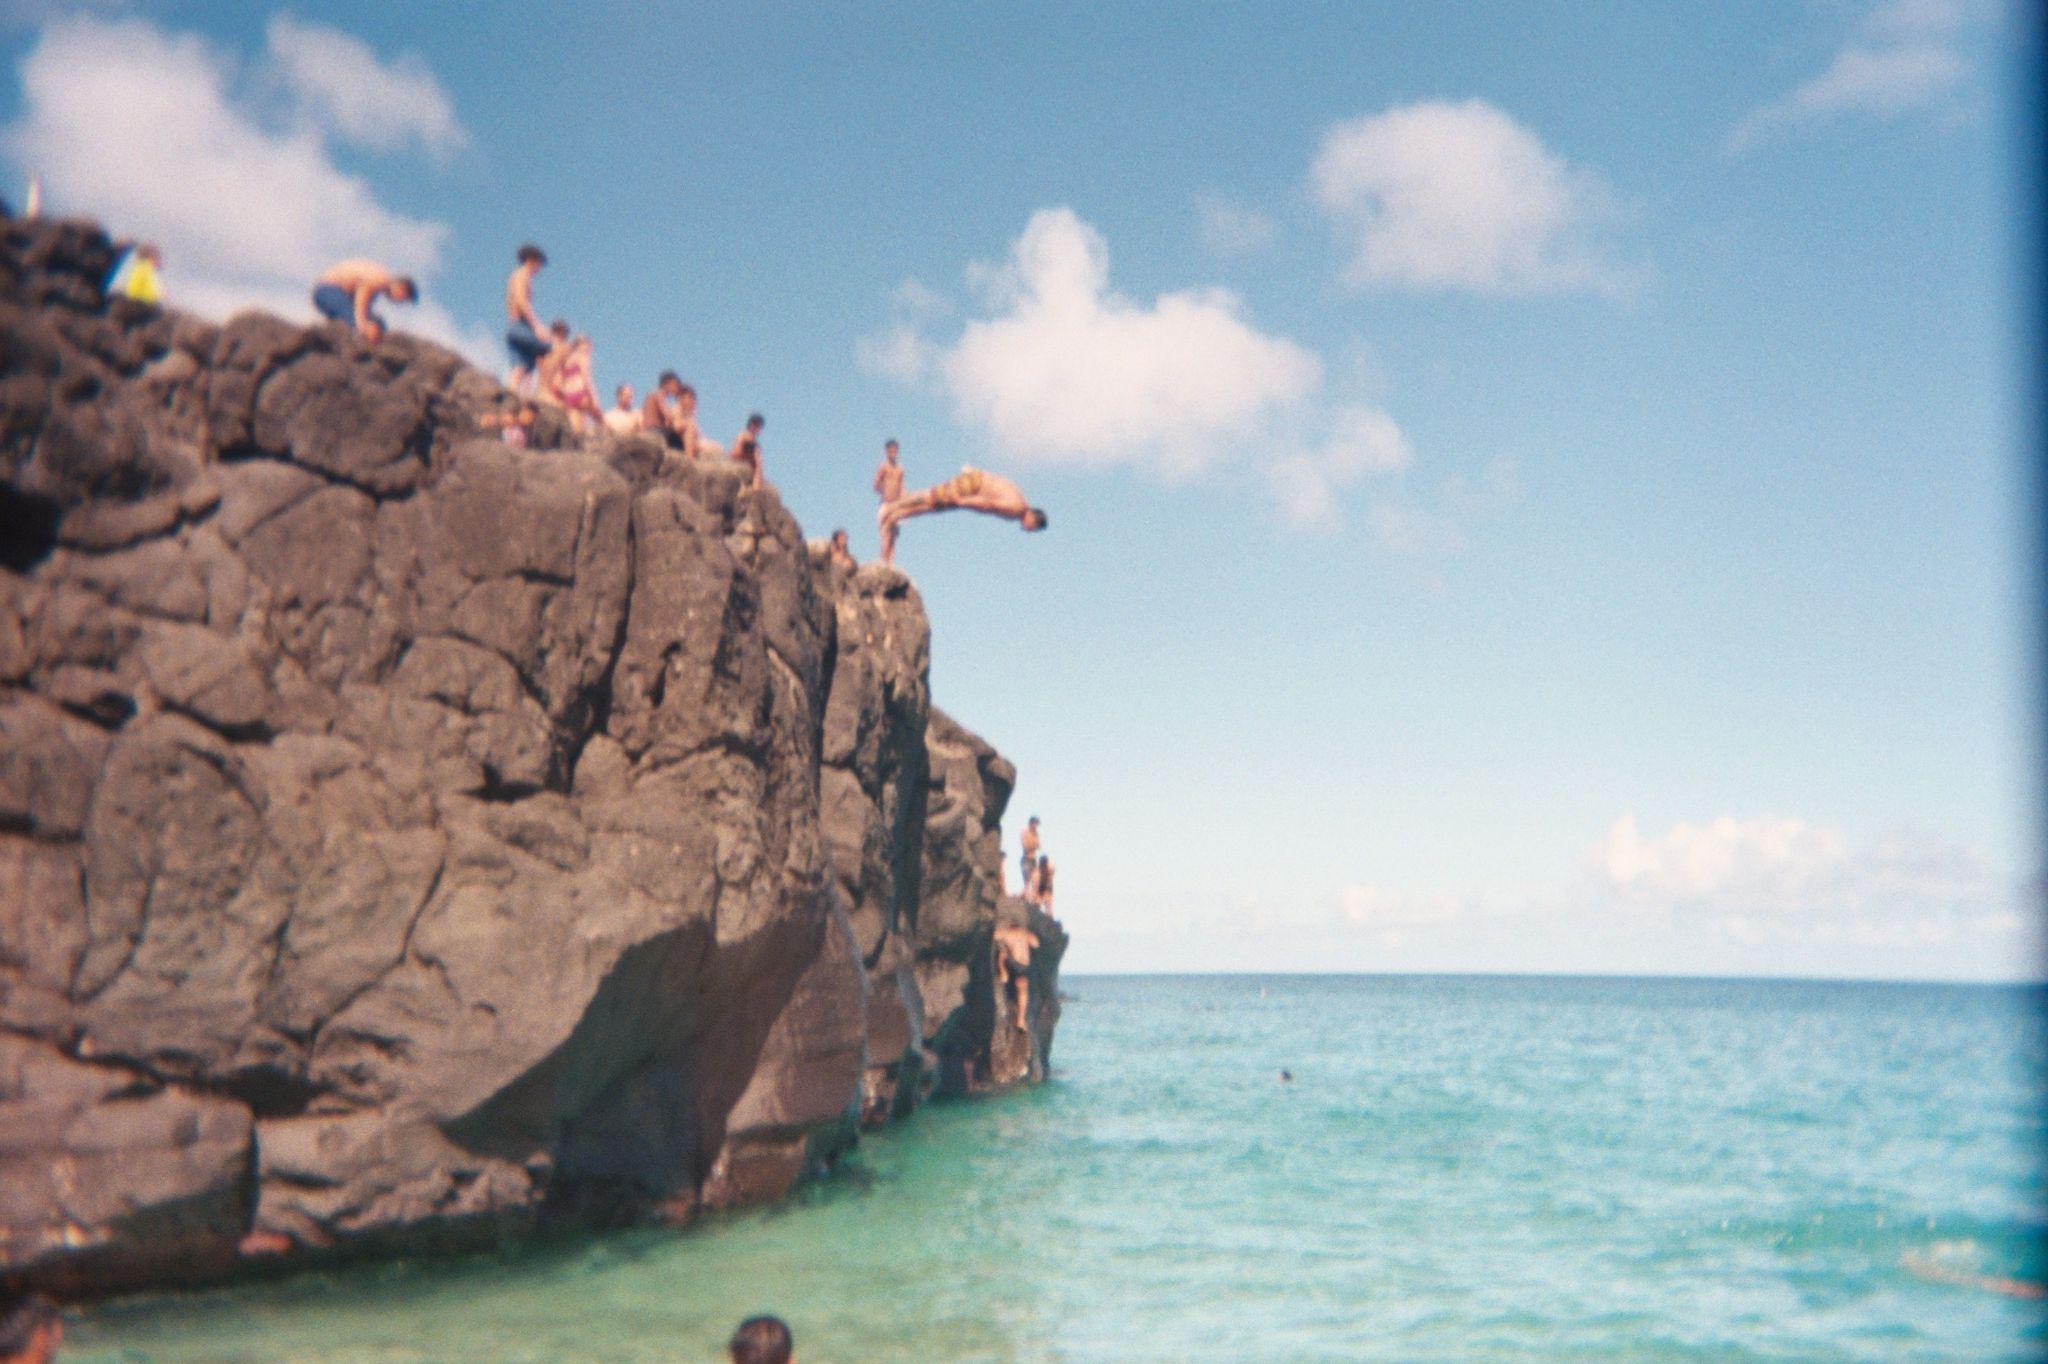 People jumping off a cliff into the ocean.